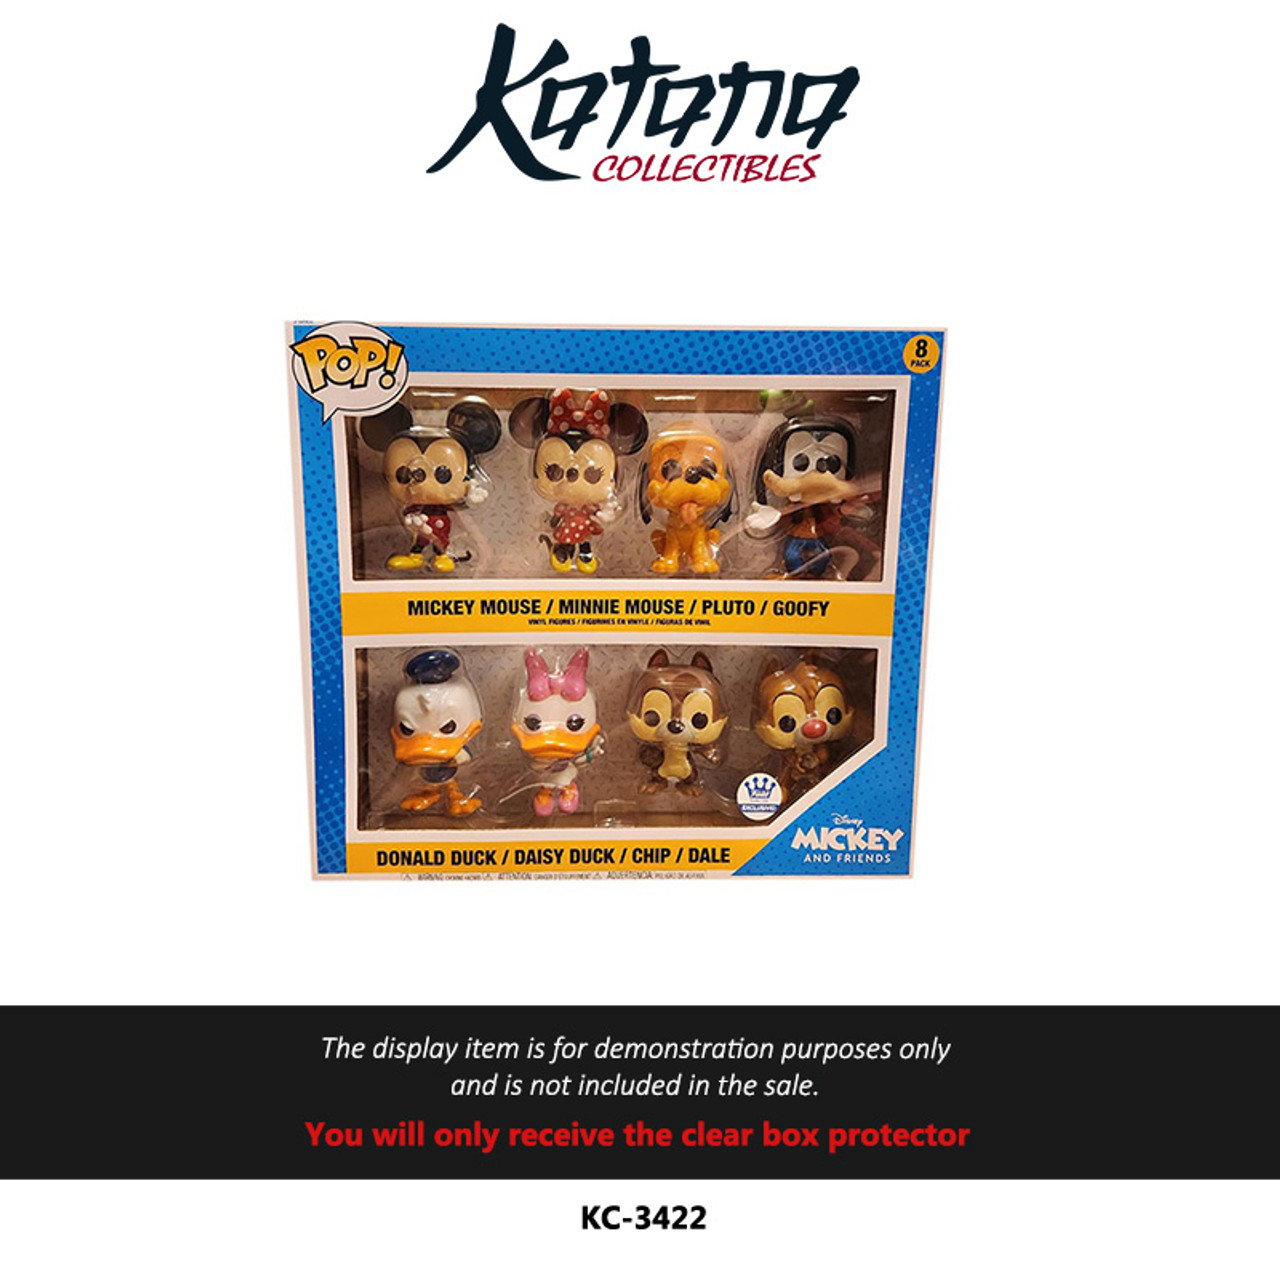 Katana Collectibles Protector For Funko Mickey and Friends 8 Pack.